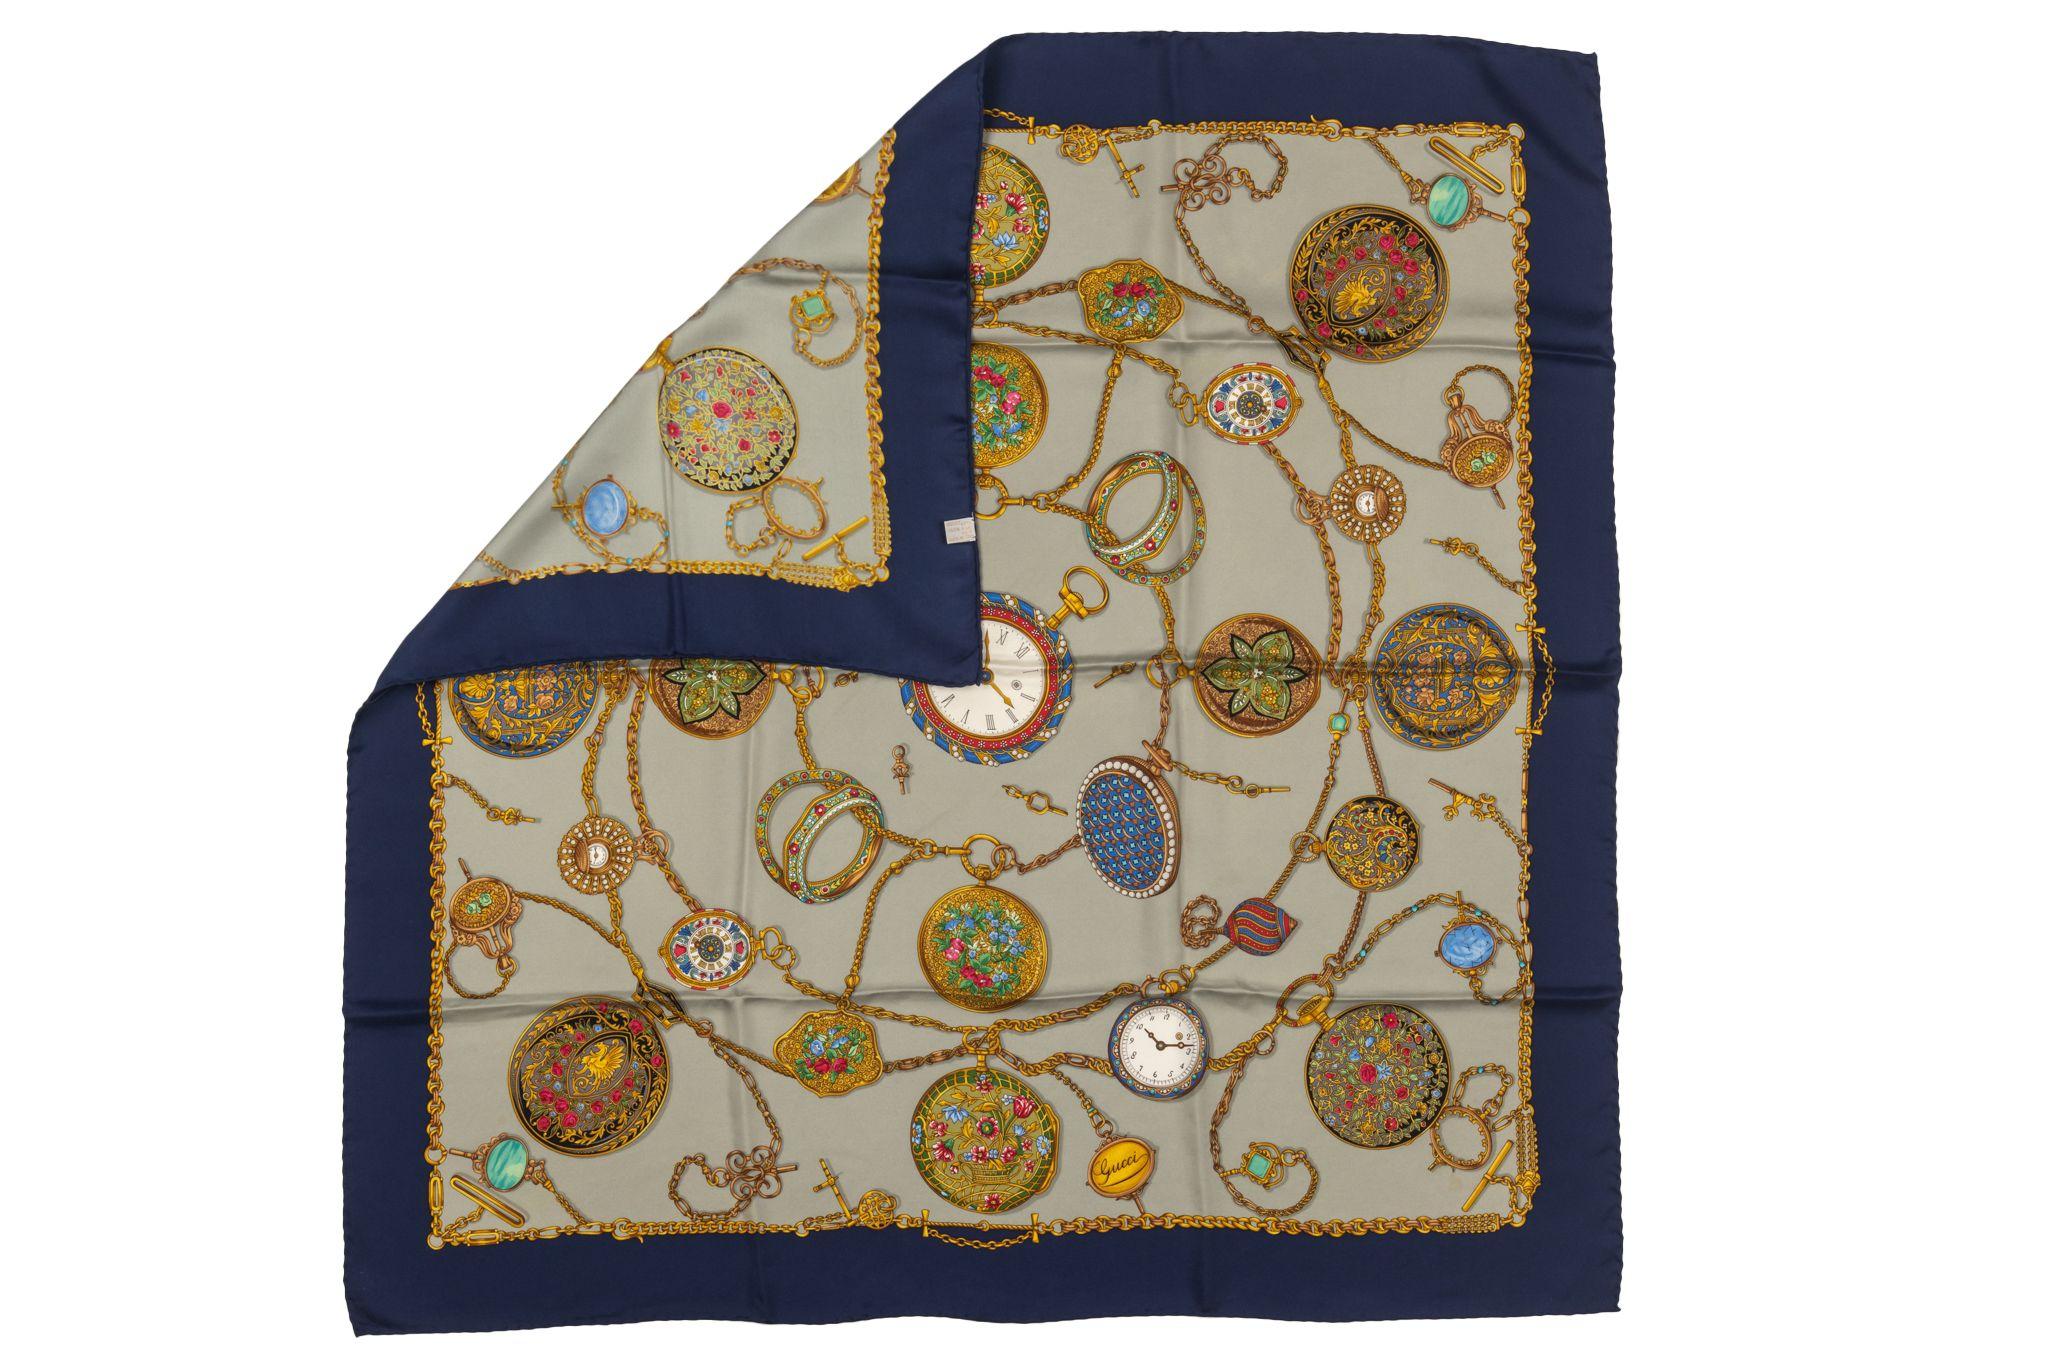 Gucci Vintage Clock Silk Scarf. The piece's print shows different clocks. It is in good condition and has minor stain.